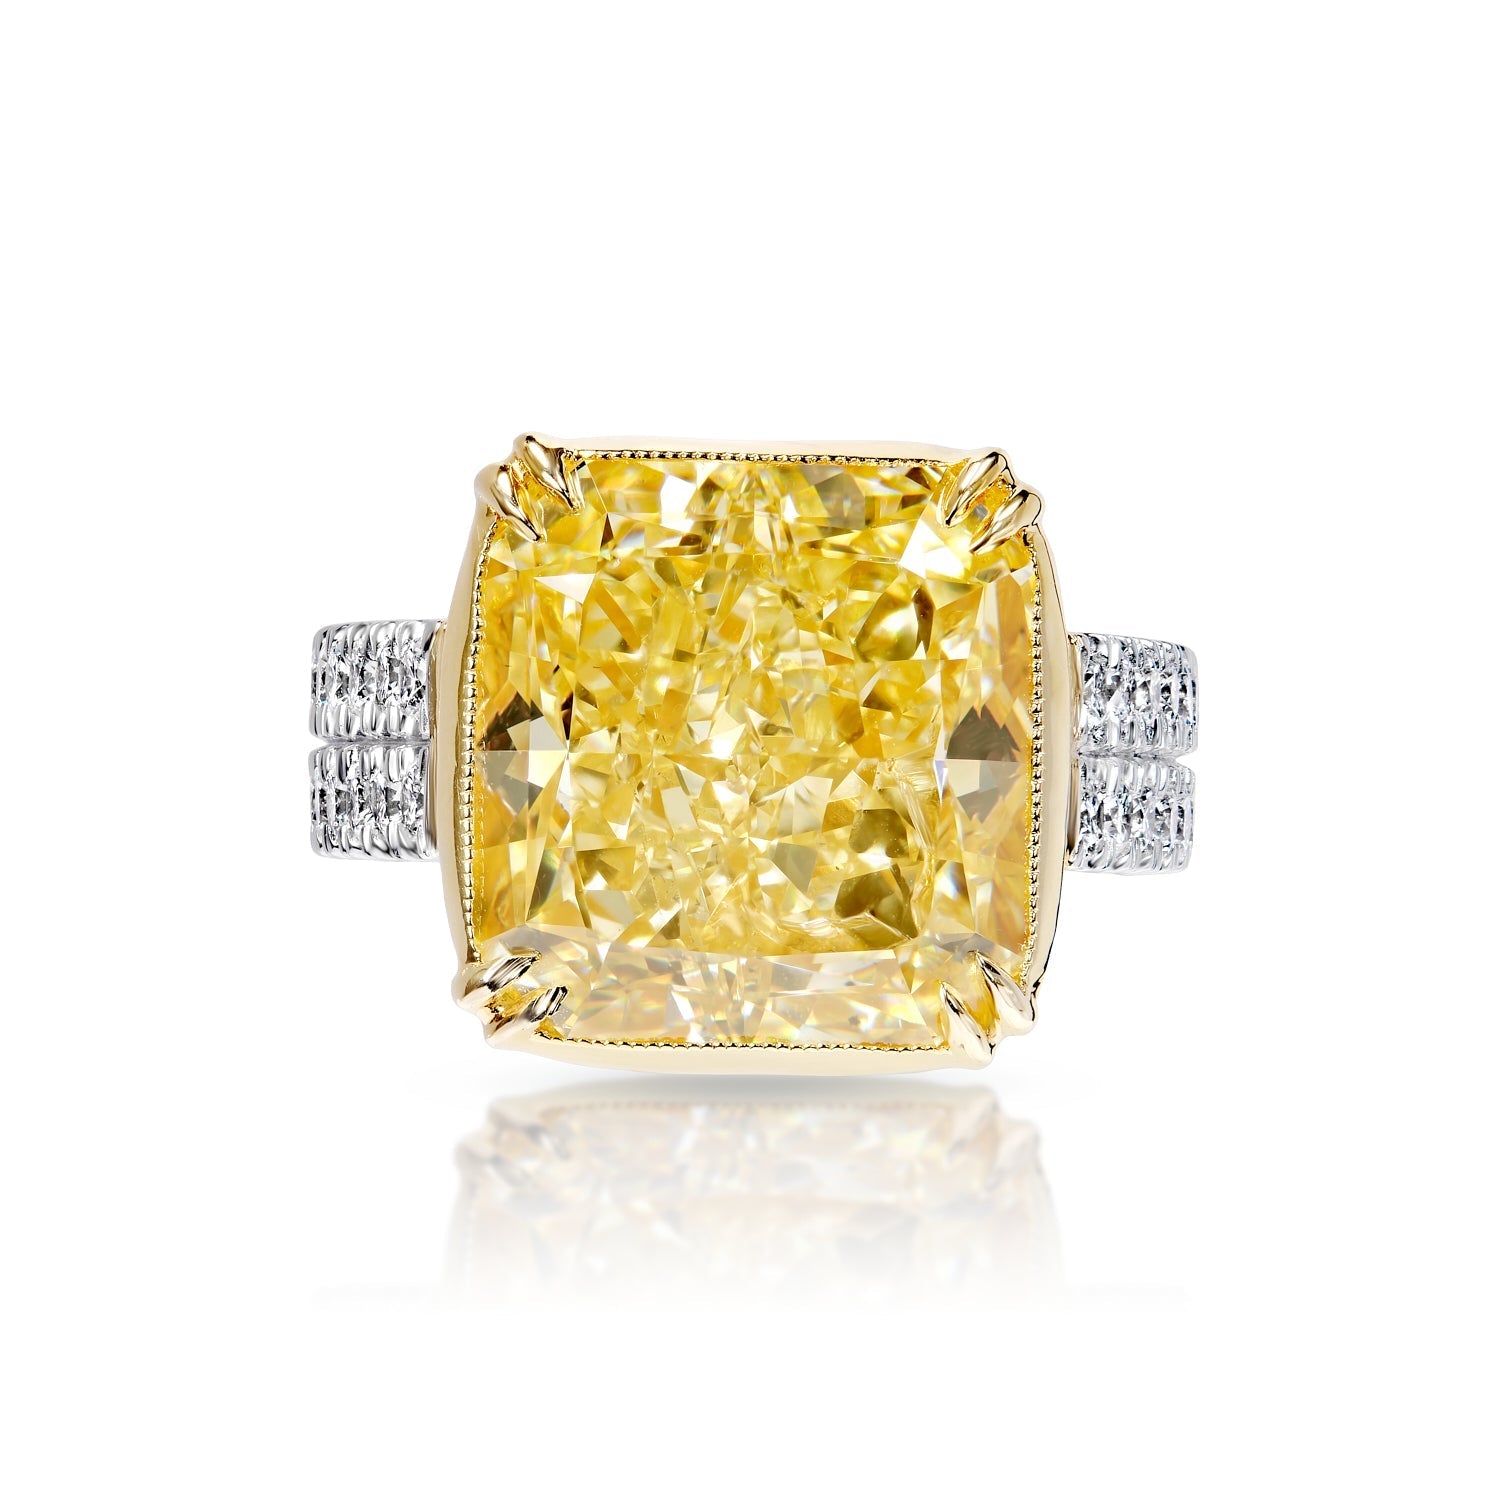 Why Your Engagement Ring should be Fancy Yellow Radiant Cut Diamond